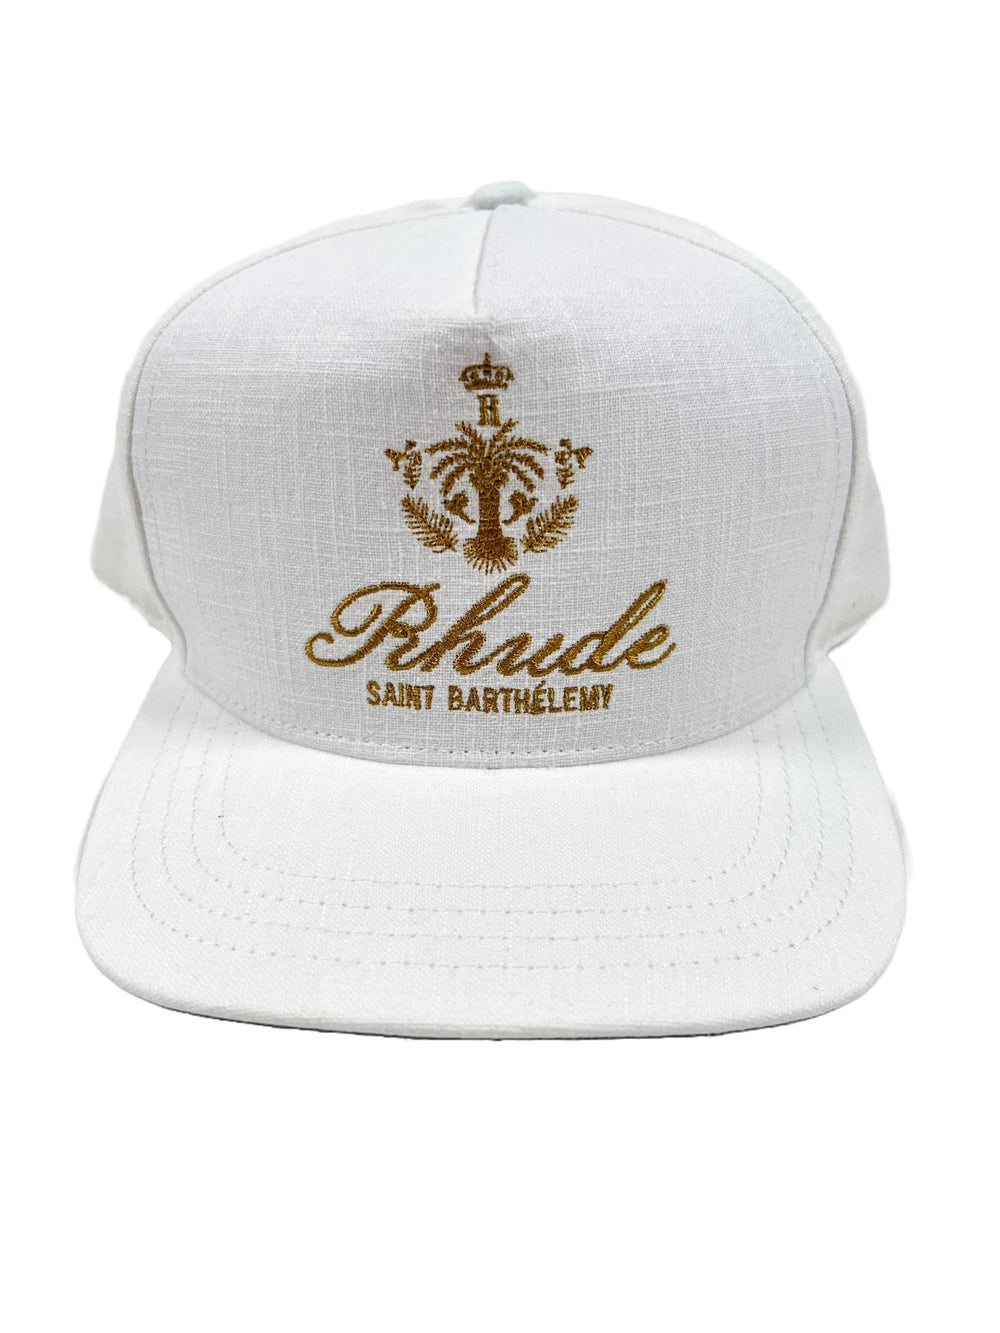 A white RHUDE ROSEWOOD HAT IVORY with a gold logo on it, made from a polyester-cotton blend.